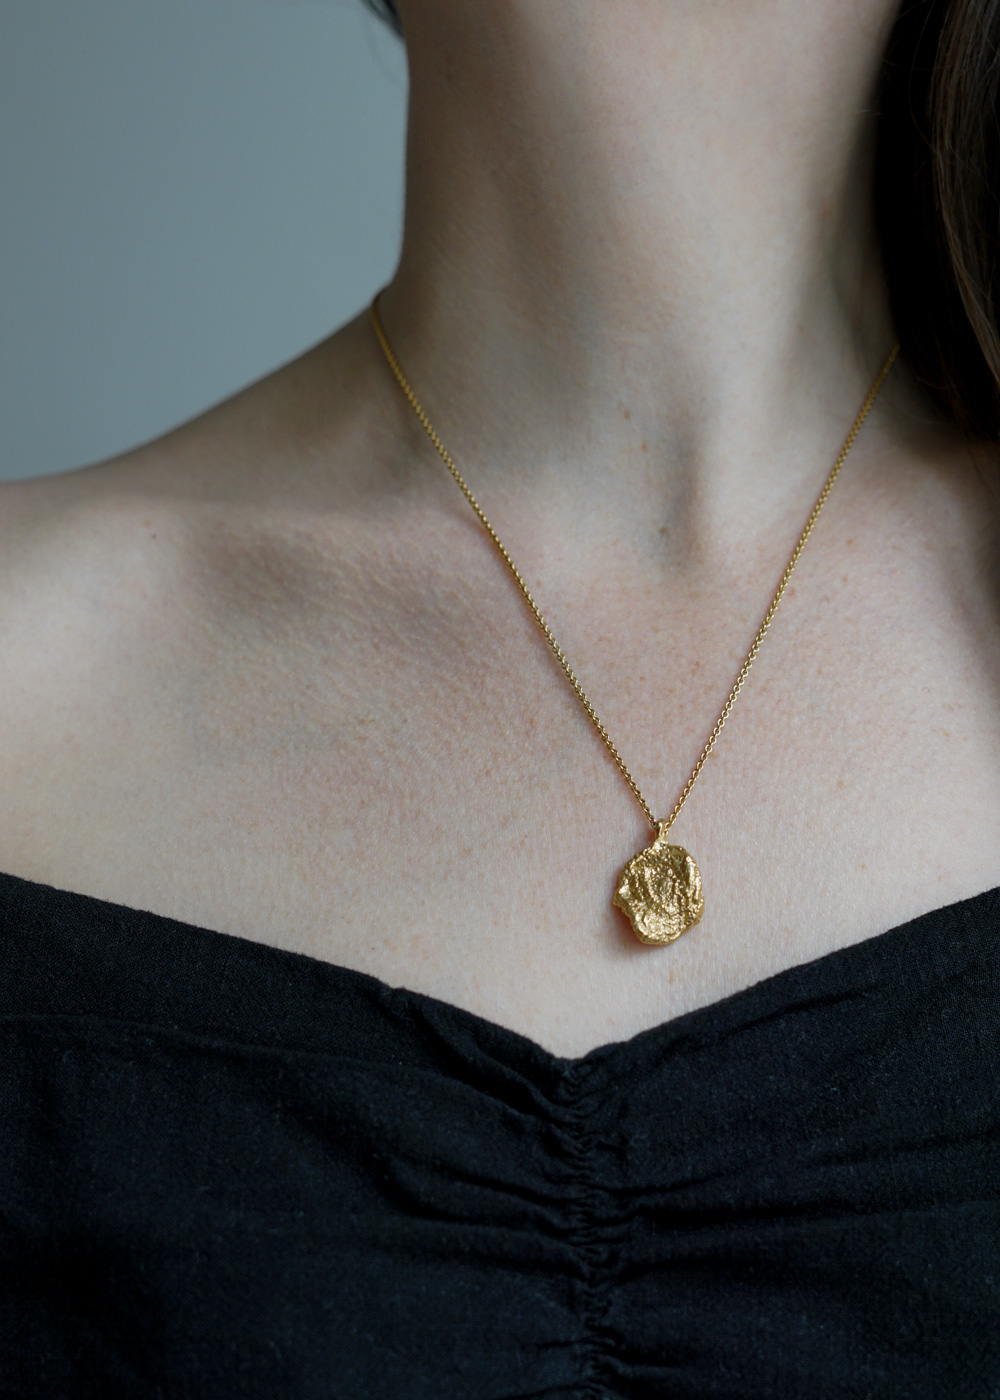 Handcrafted Gold Jewelry, Necklace Maria Sørensen, Danish Design | Fashion Style Timeless Aesthetic, Statement Golden Jewlery | RG Daily Blog